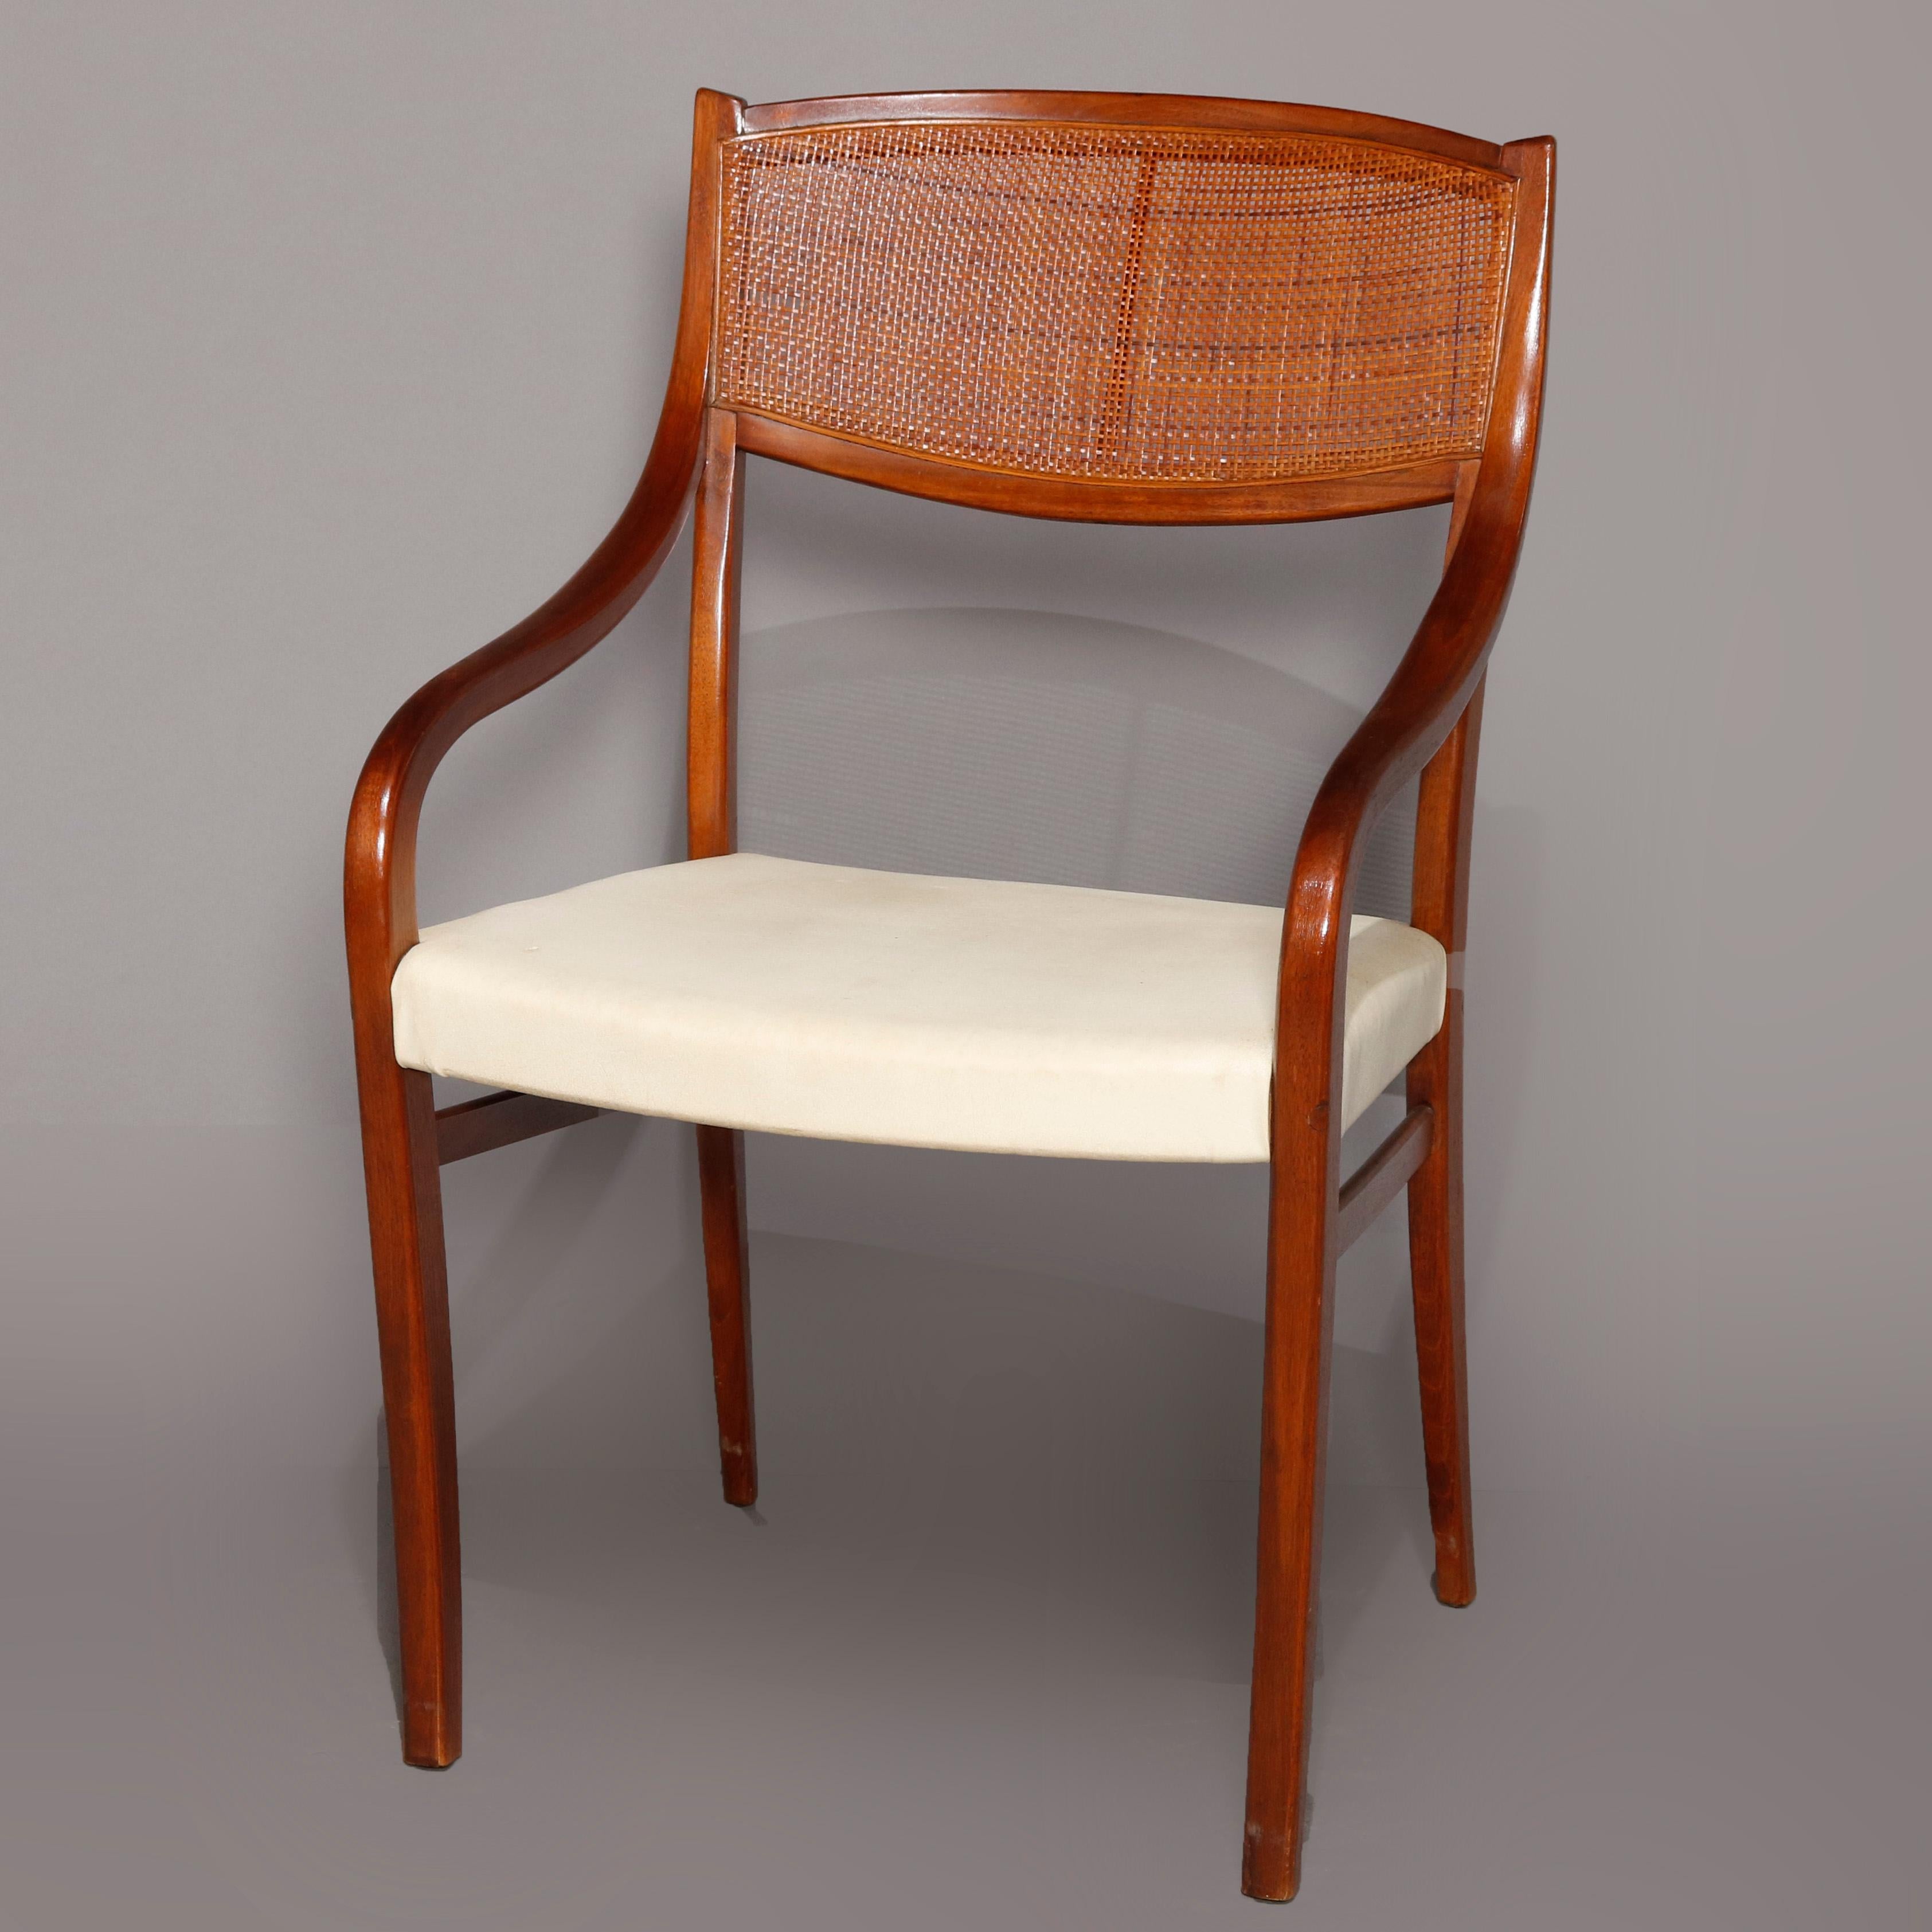 A midcentury Danish modern dining set offers walnut extension dining table & six cane-back and upholstered chairs by Drexel, 20th century

***DELIVERY NOTICE – Due to COVID-19 we are employing NO-CONTACT PRACTICES in the transfer of purchased items.